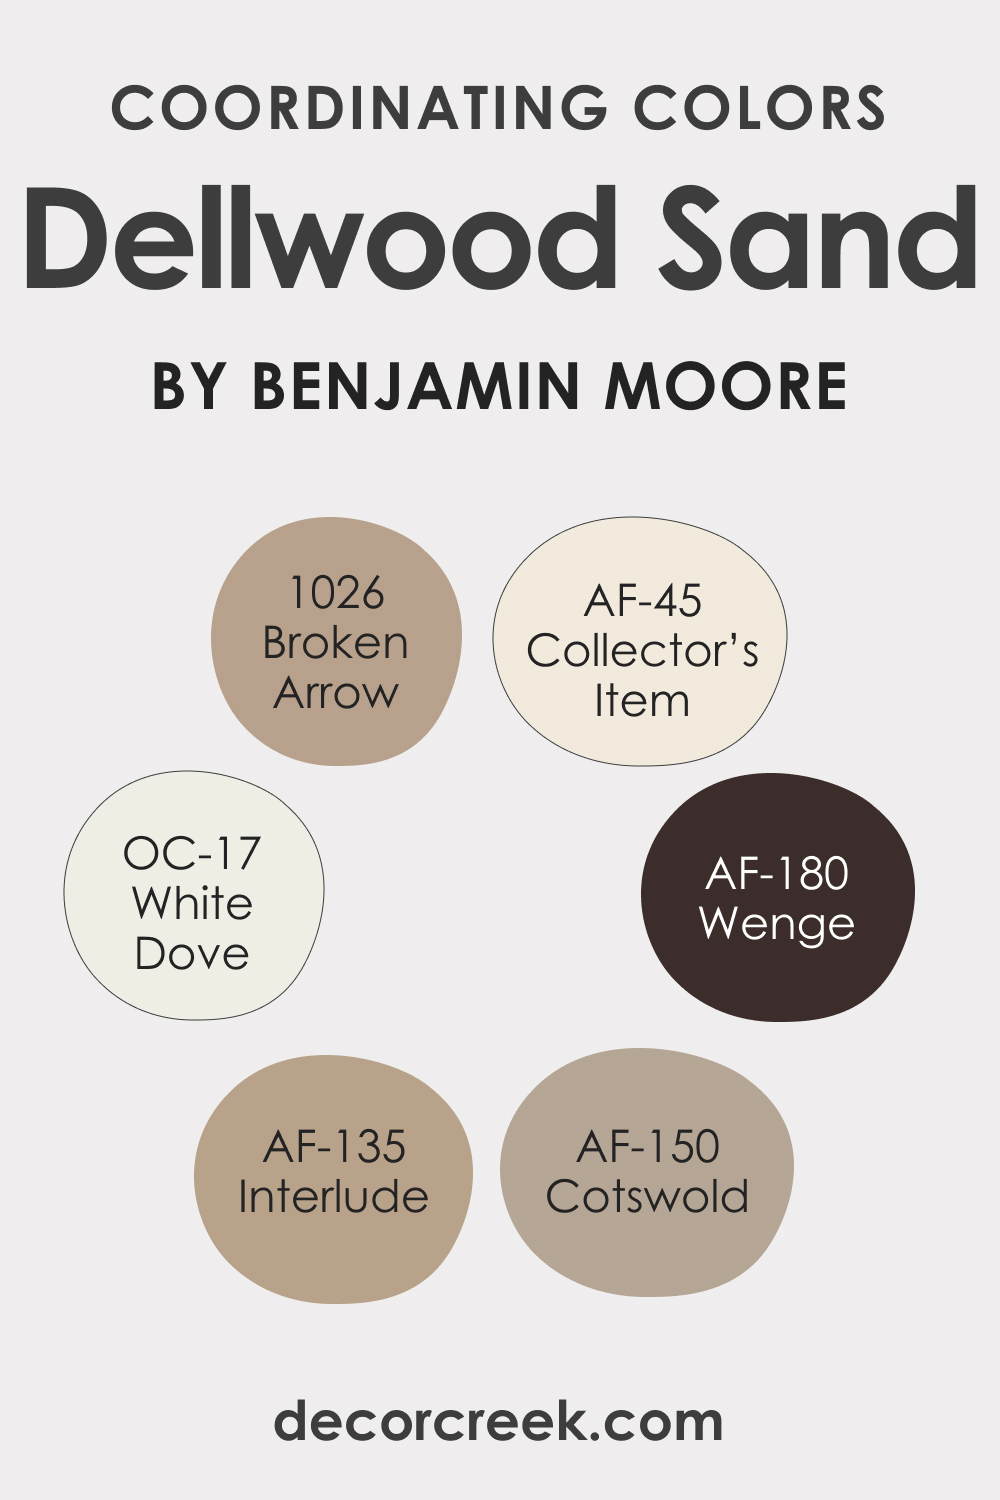 Coordinating Colors of Dellwood Sand 1019